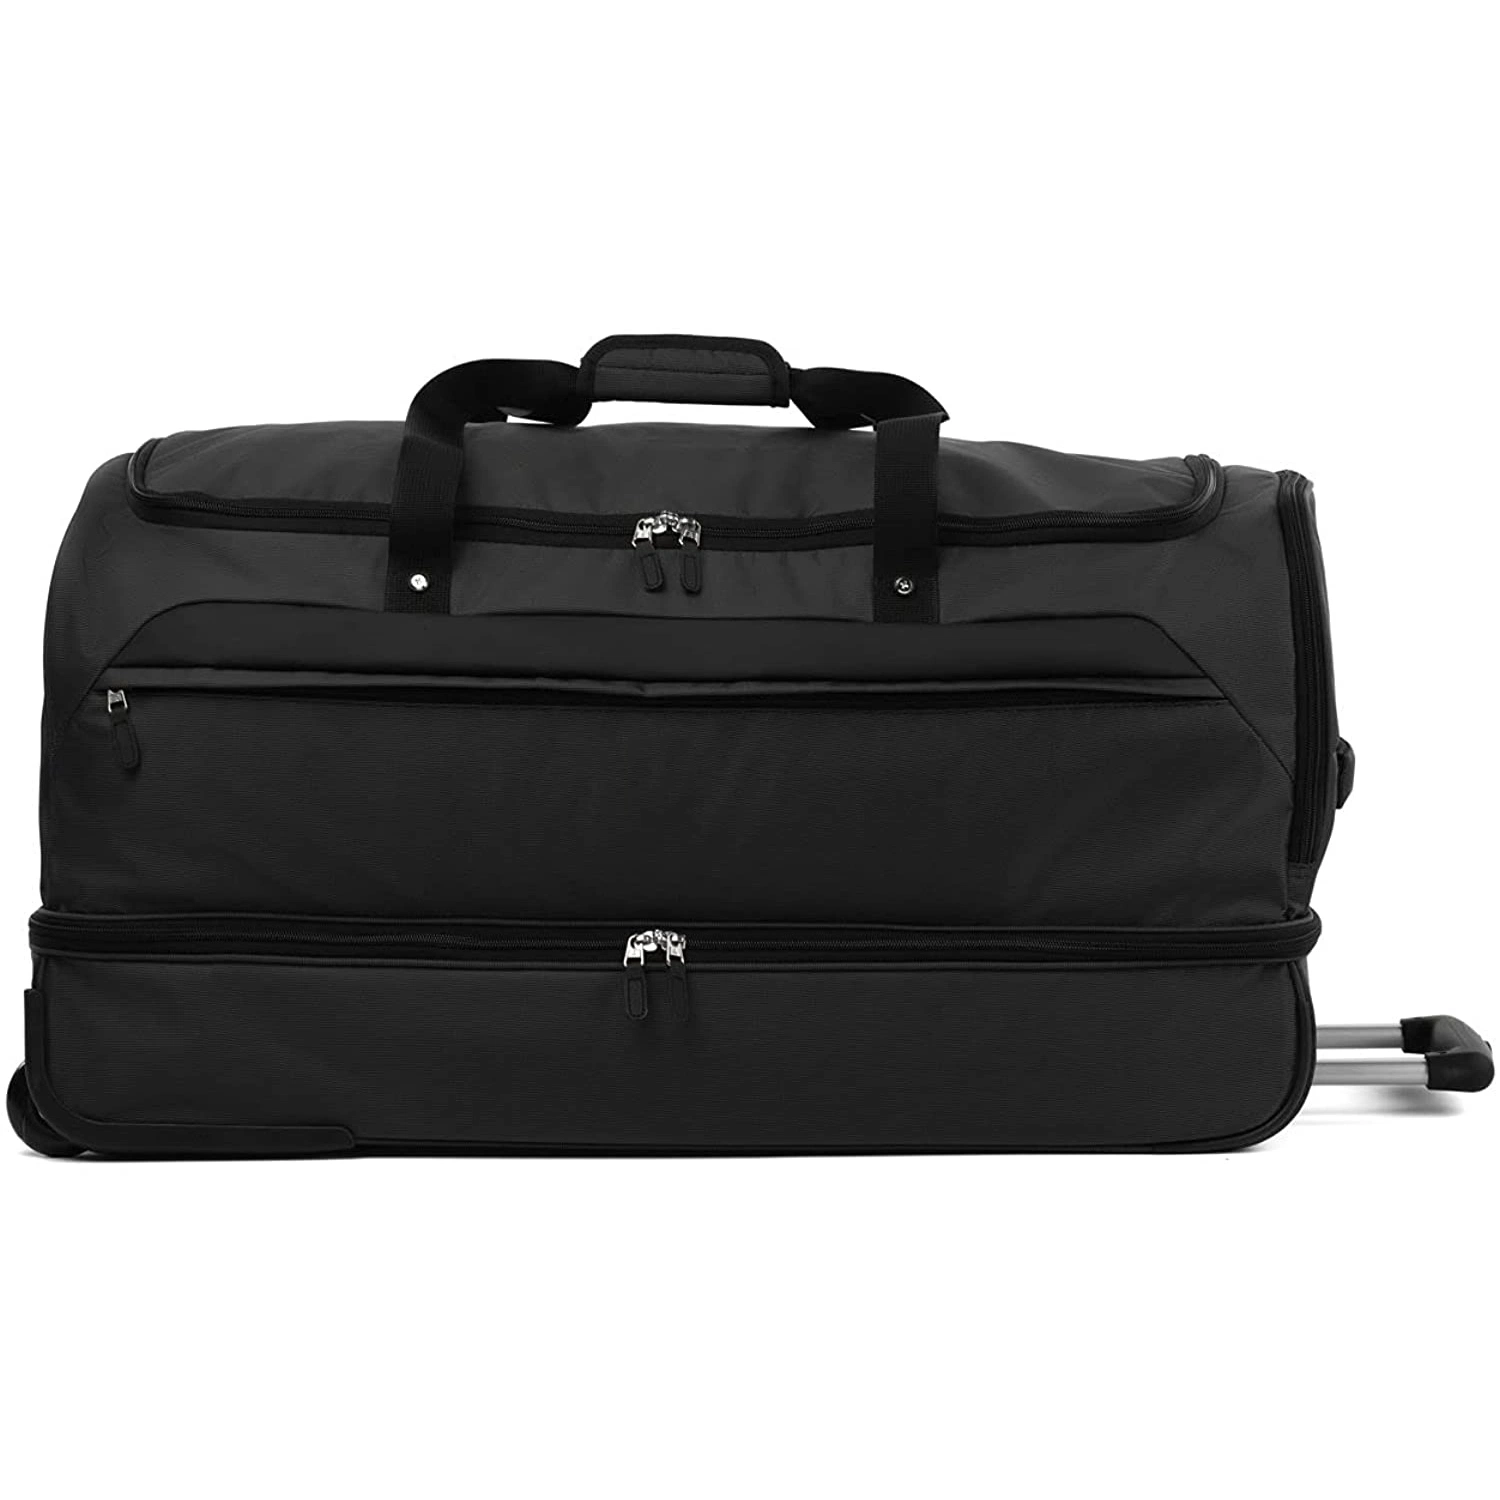 Wheeled Rolling Duffel Luggage Travel Trolley Duffle Bag with Wheels and 3 Large Packing Cubes for Men, Women